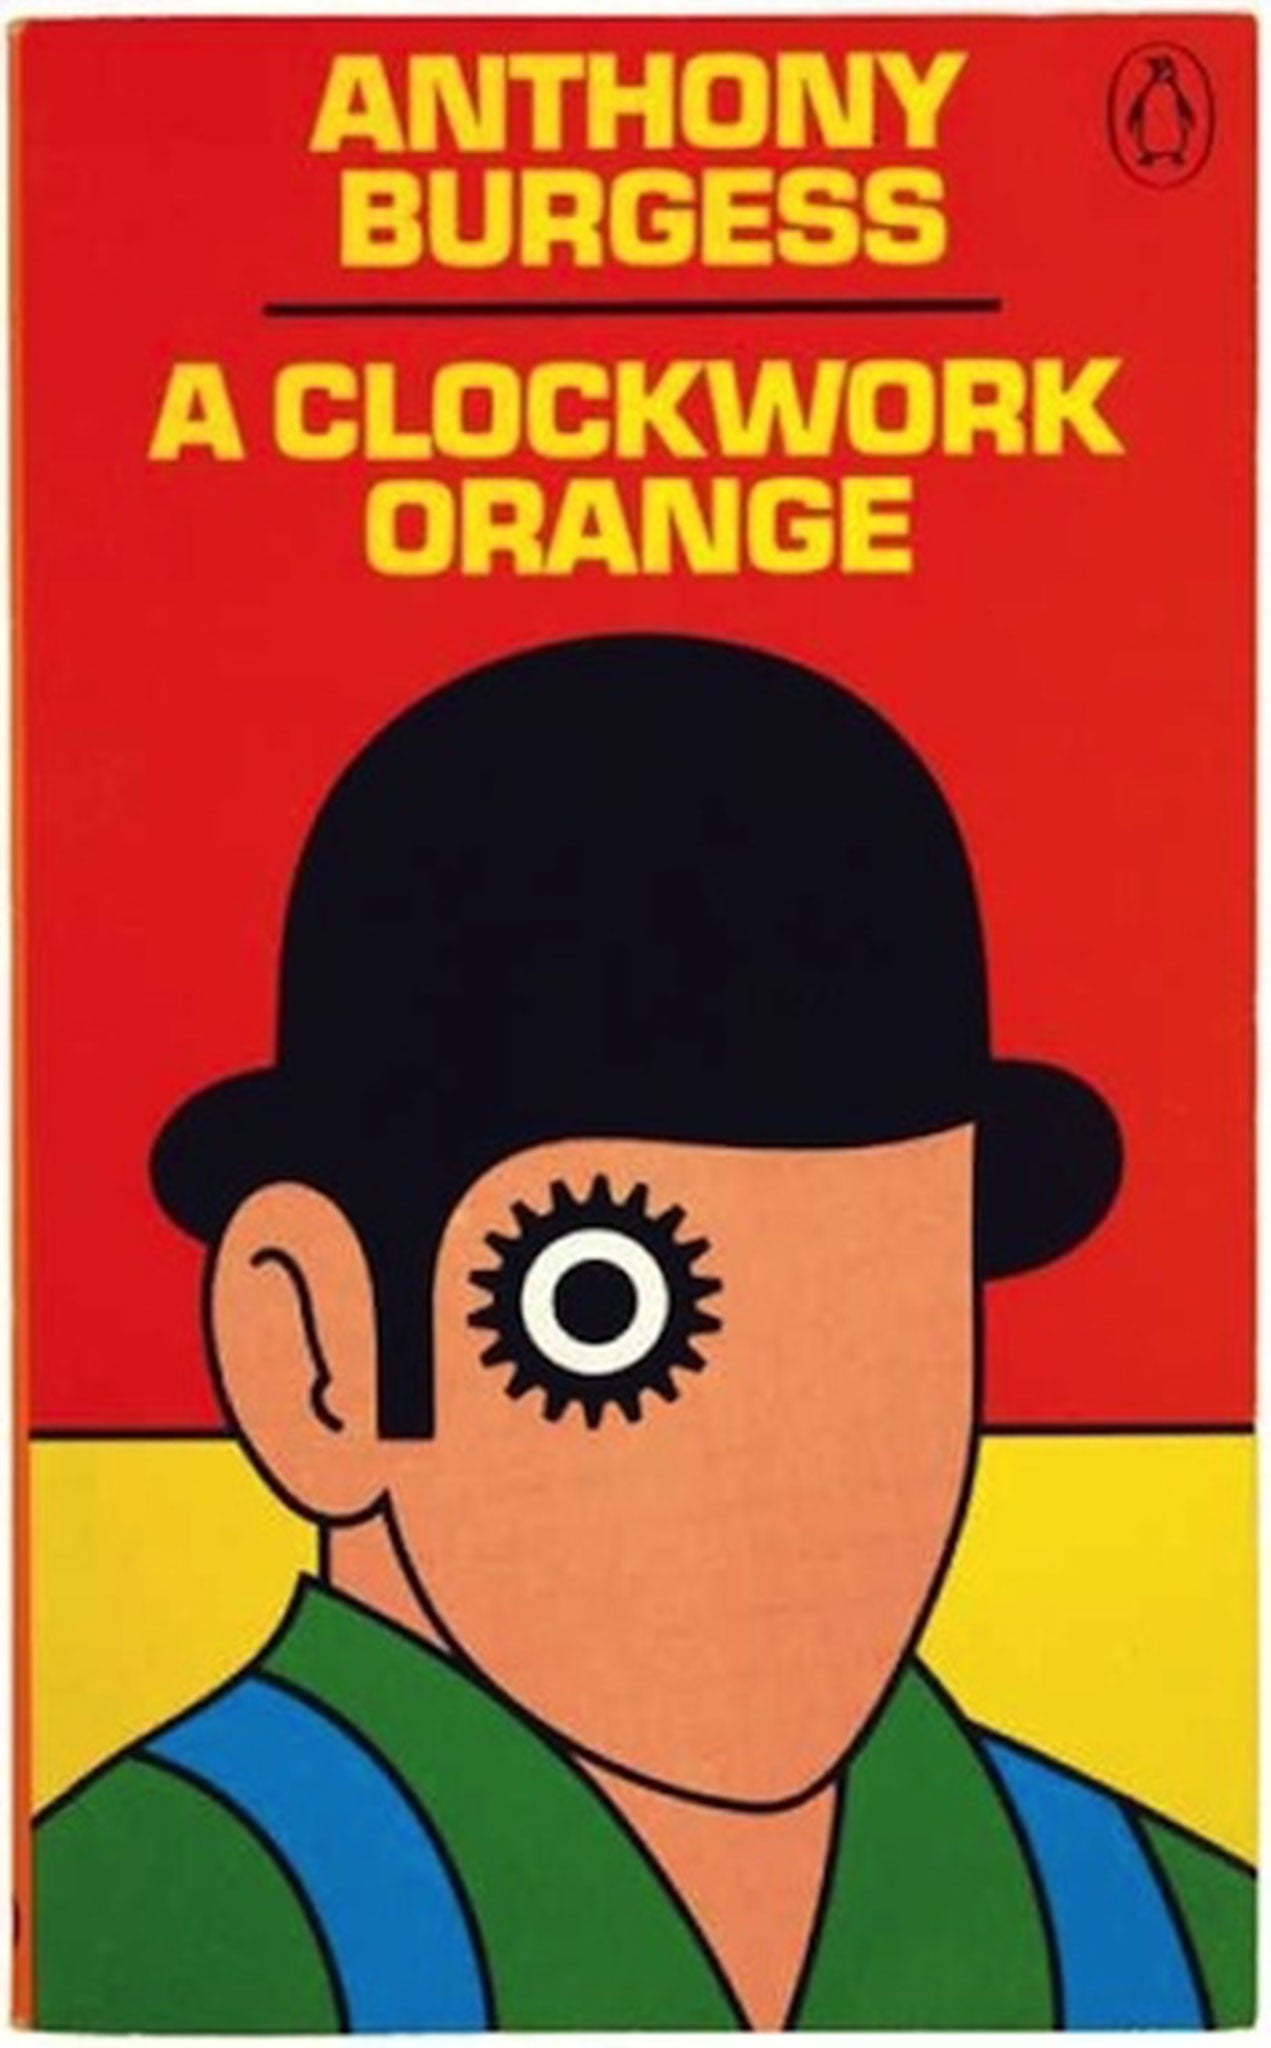 David Pelham came up with this famous cover ten years after A Clockwork Orange was first published in 1962.